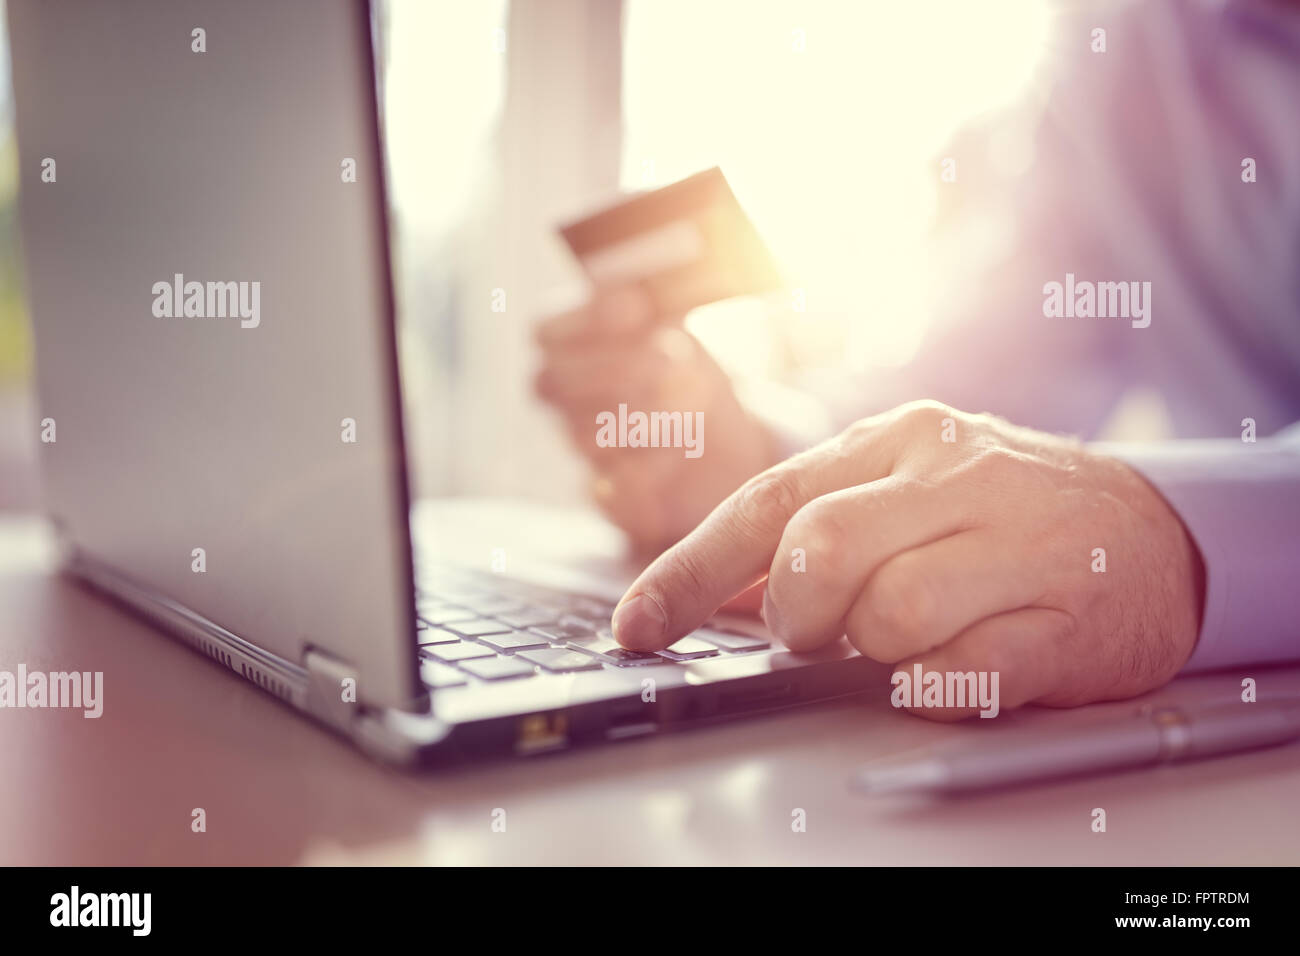 Man with credit card using a laptop computer for internet shopping Stock Photo